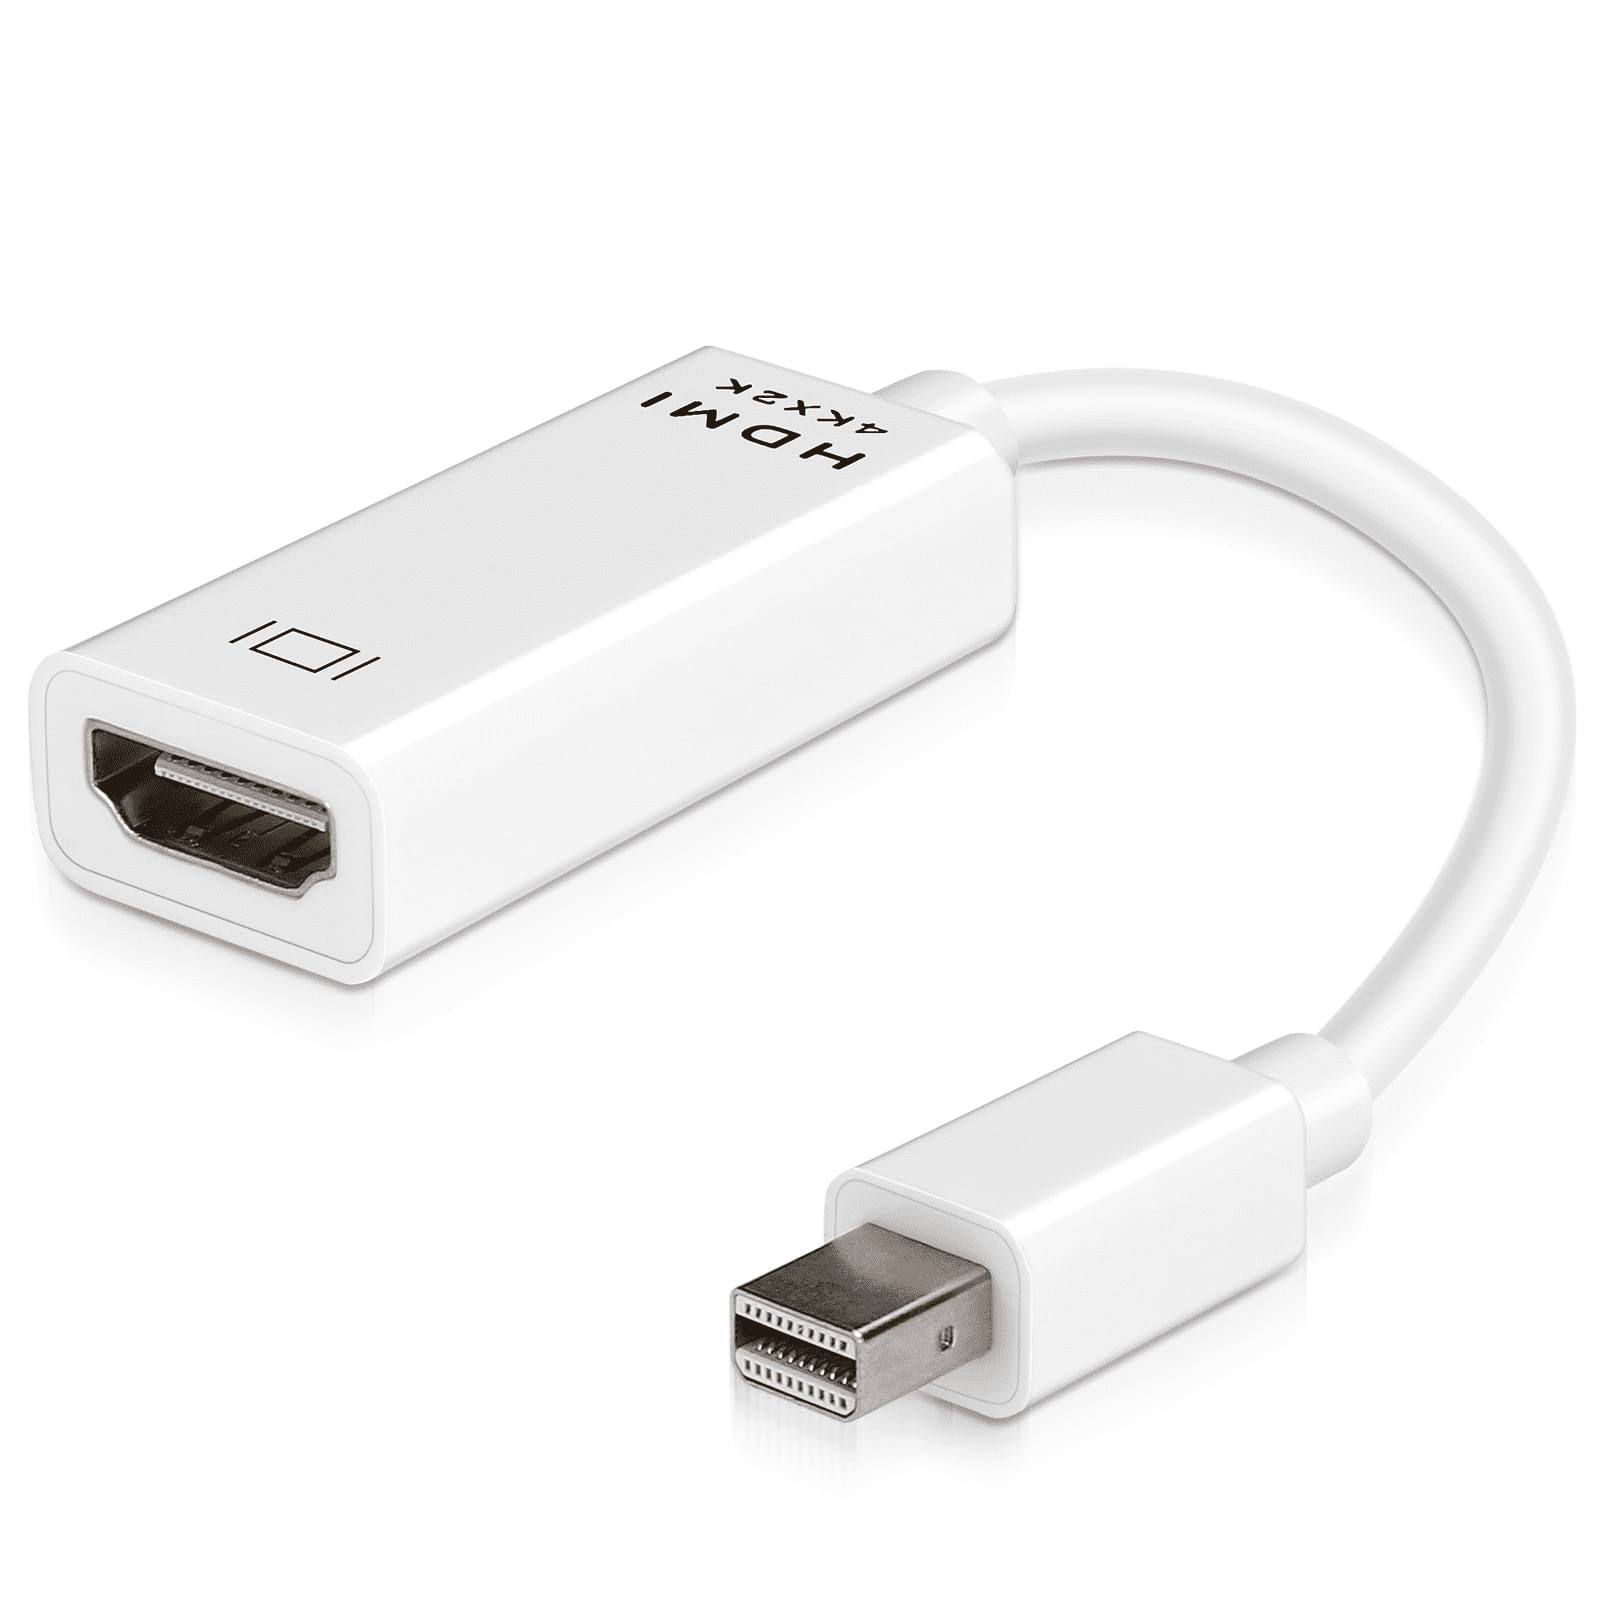 Mini to HDMI Adapter Lenovo T430s DP to HDMI Adapter Compatible with MacBook Air/Pro, Microsoft Surface Pro/Dock, Projector More 2-Pack - Walmart.com